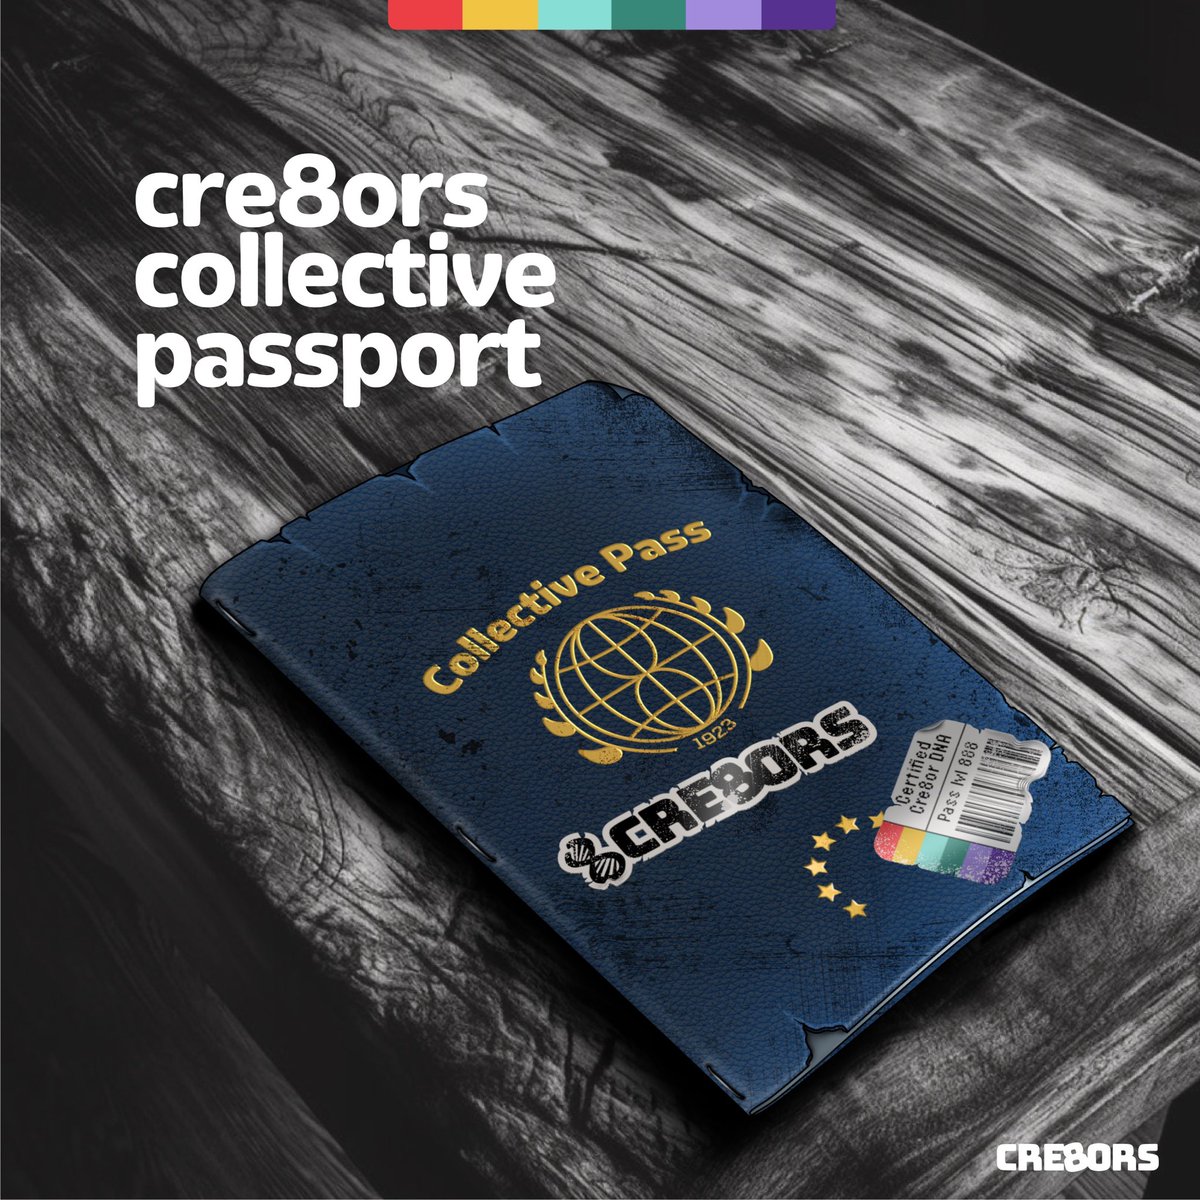 We are giving away 1 Cre8ors Collective Passport.

This is your chance to join us.

You must:

🧬 follow @Cre8orsNFT
🧬 retweet and tag friends